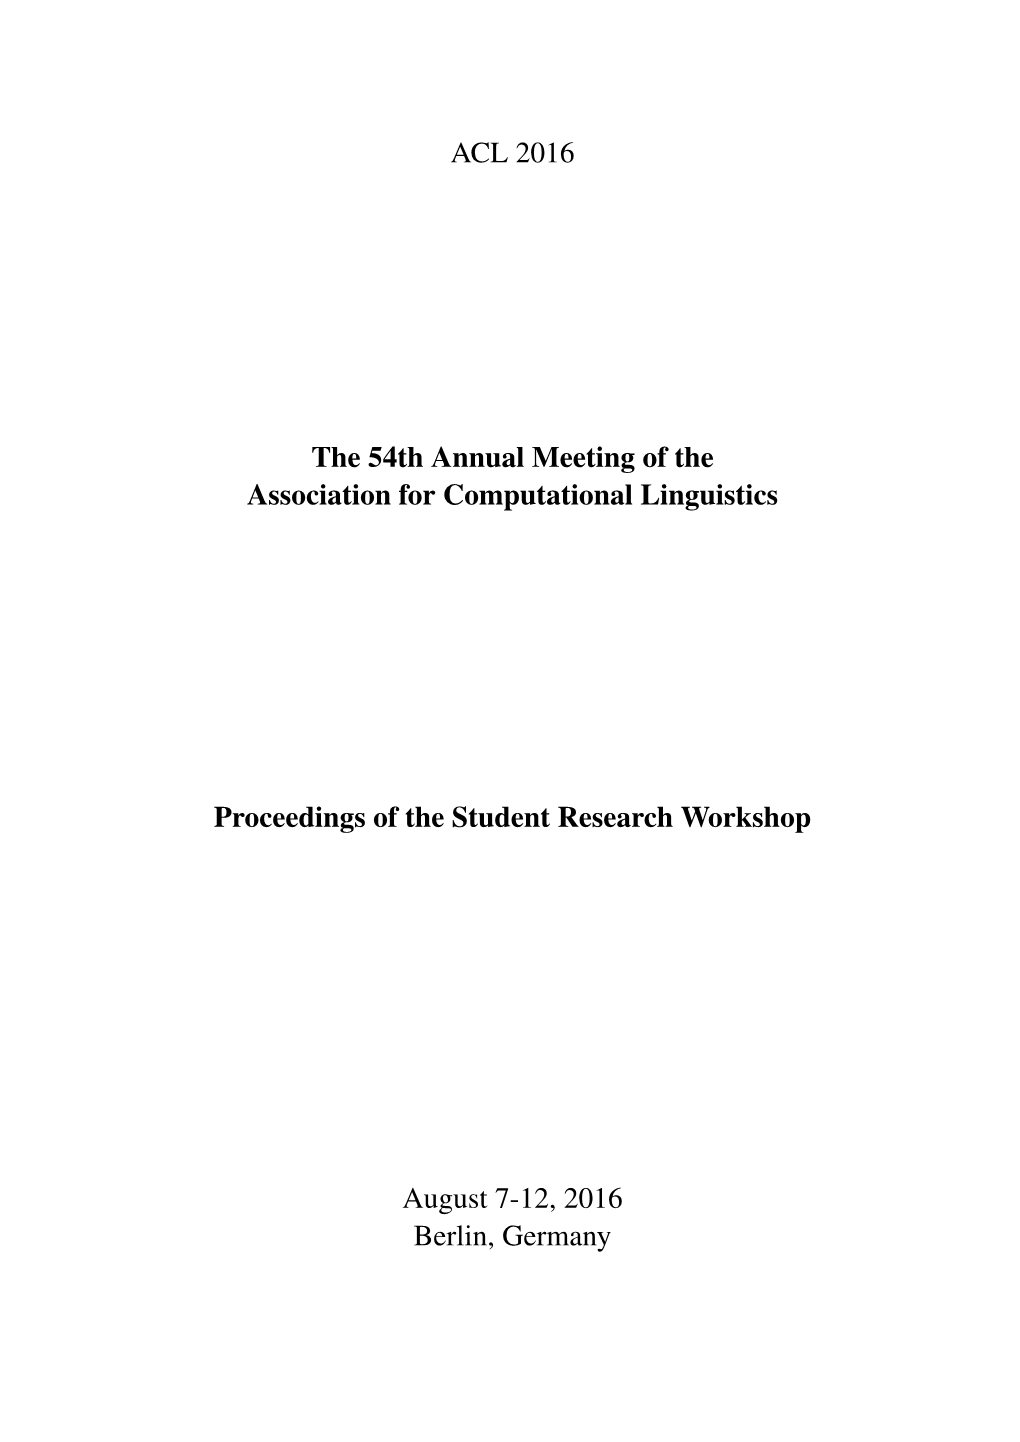 Proceedings of the ACL 2016 Student Research Workshop